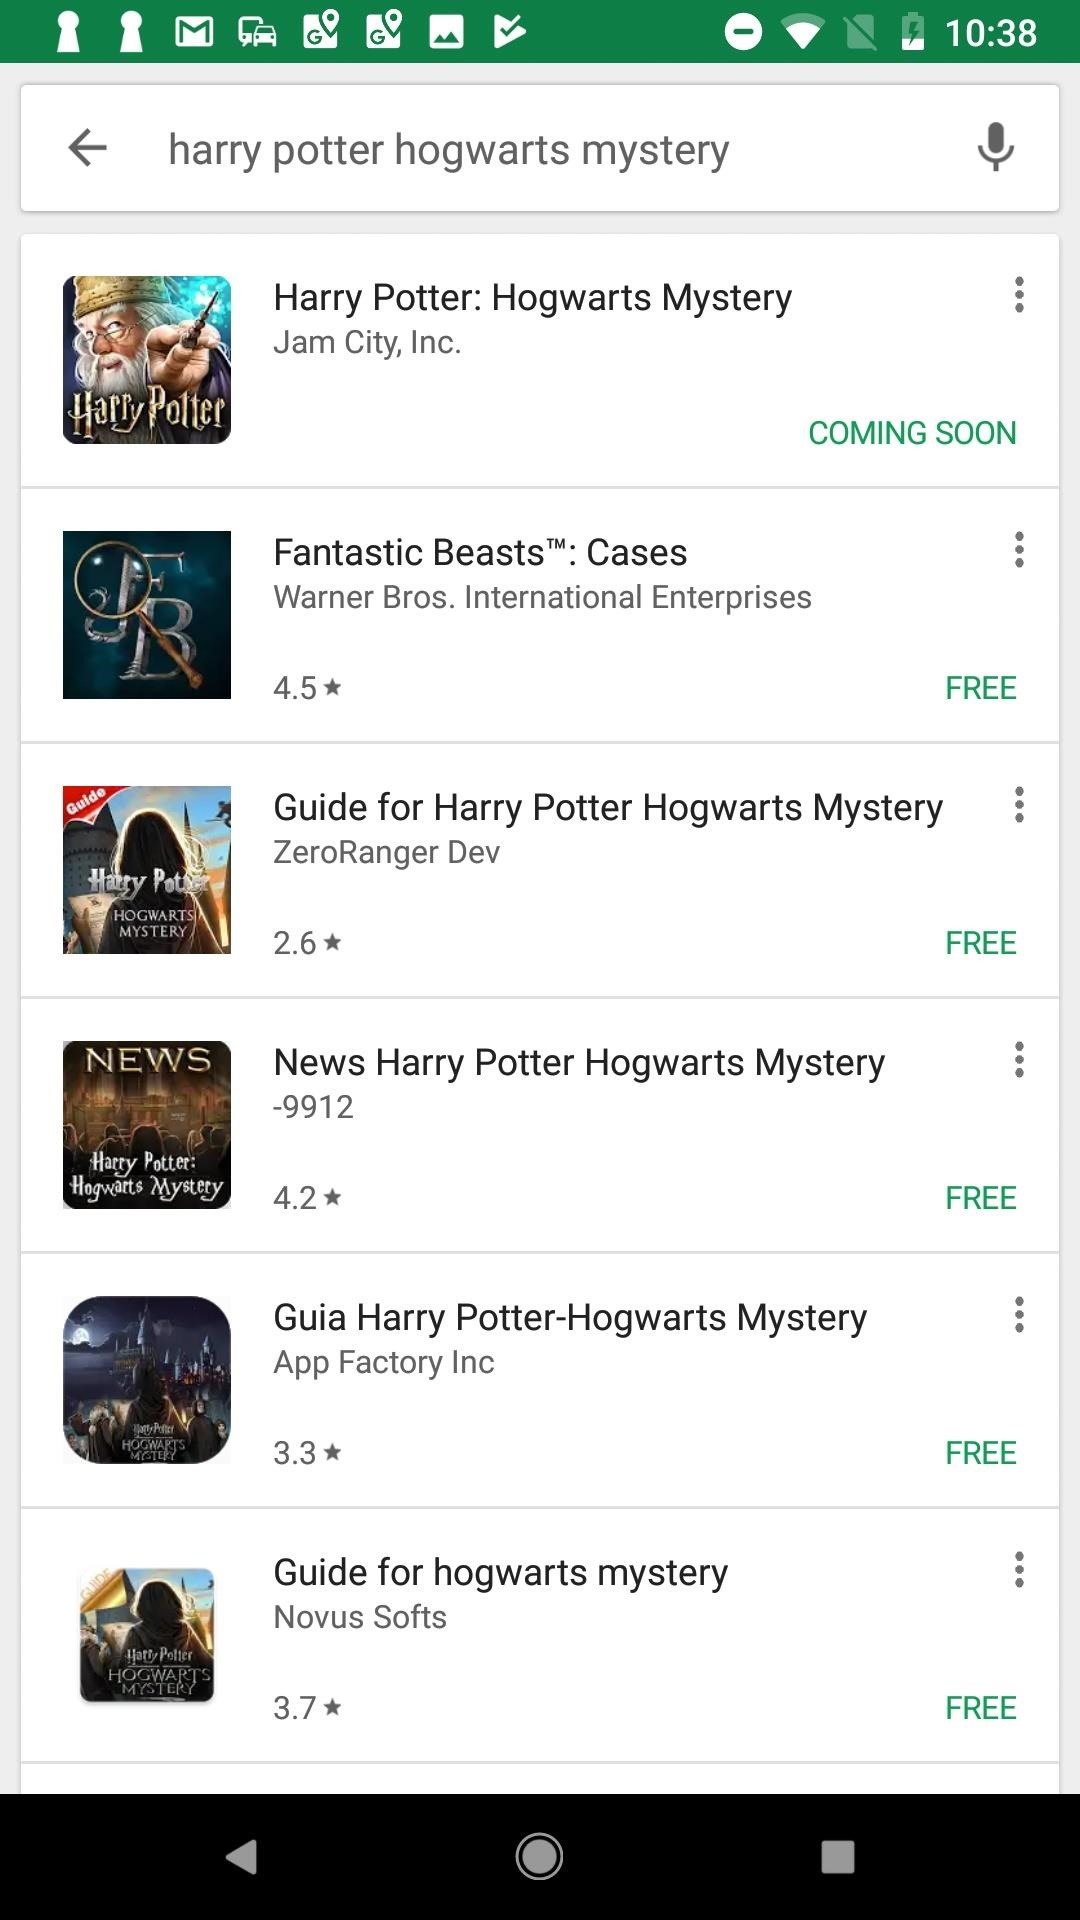 How to Pre-Register for Jam City's 'Harry Potter: Hogwarts Mystery' Game Right Now